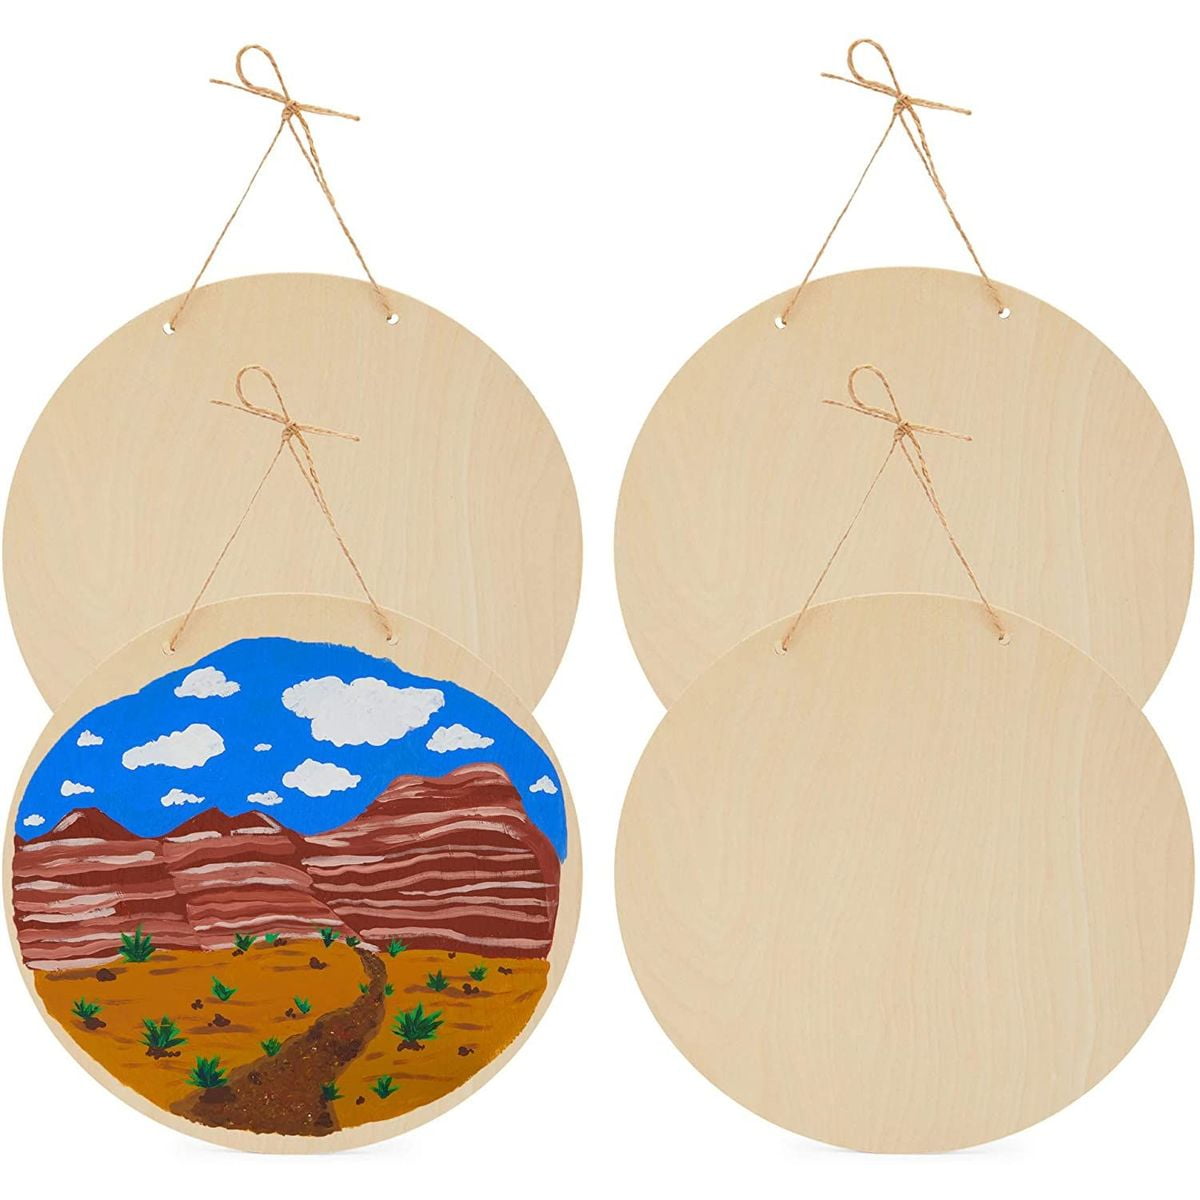 Pack of 12 Pieces Unfinished Wood Laser Cut Ornaments with Strings BULK BUY 